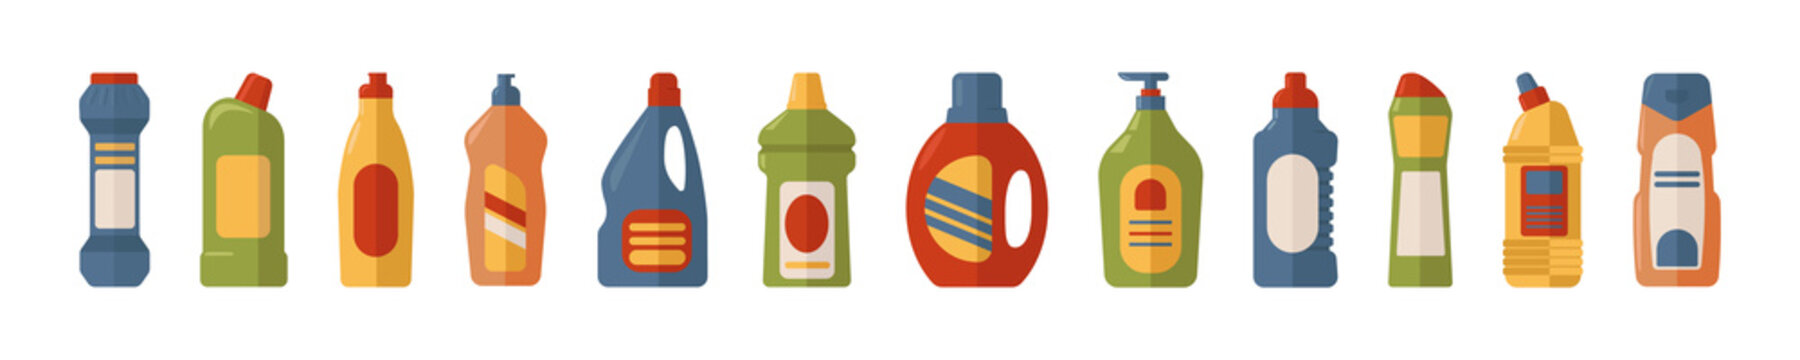 Cleaning products set, colorful bottles of various shapes. Cleaning of premises, houses, rooms. Household chemicals. Soap, gel. Vector illustration in flat cartoon style, isolated on white background	